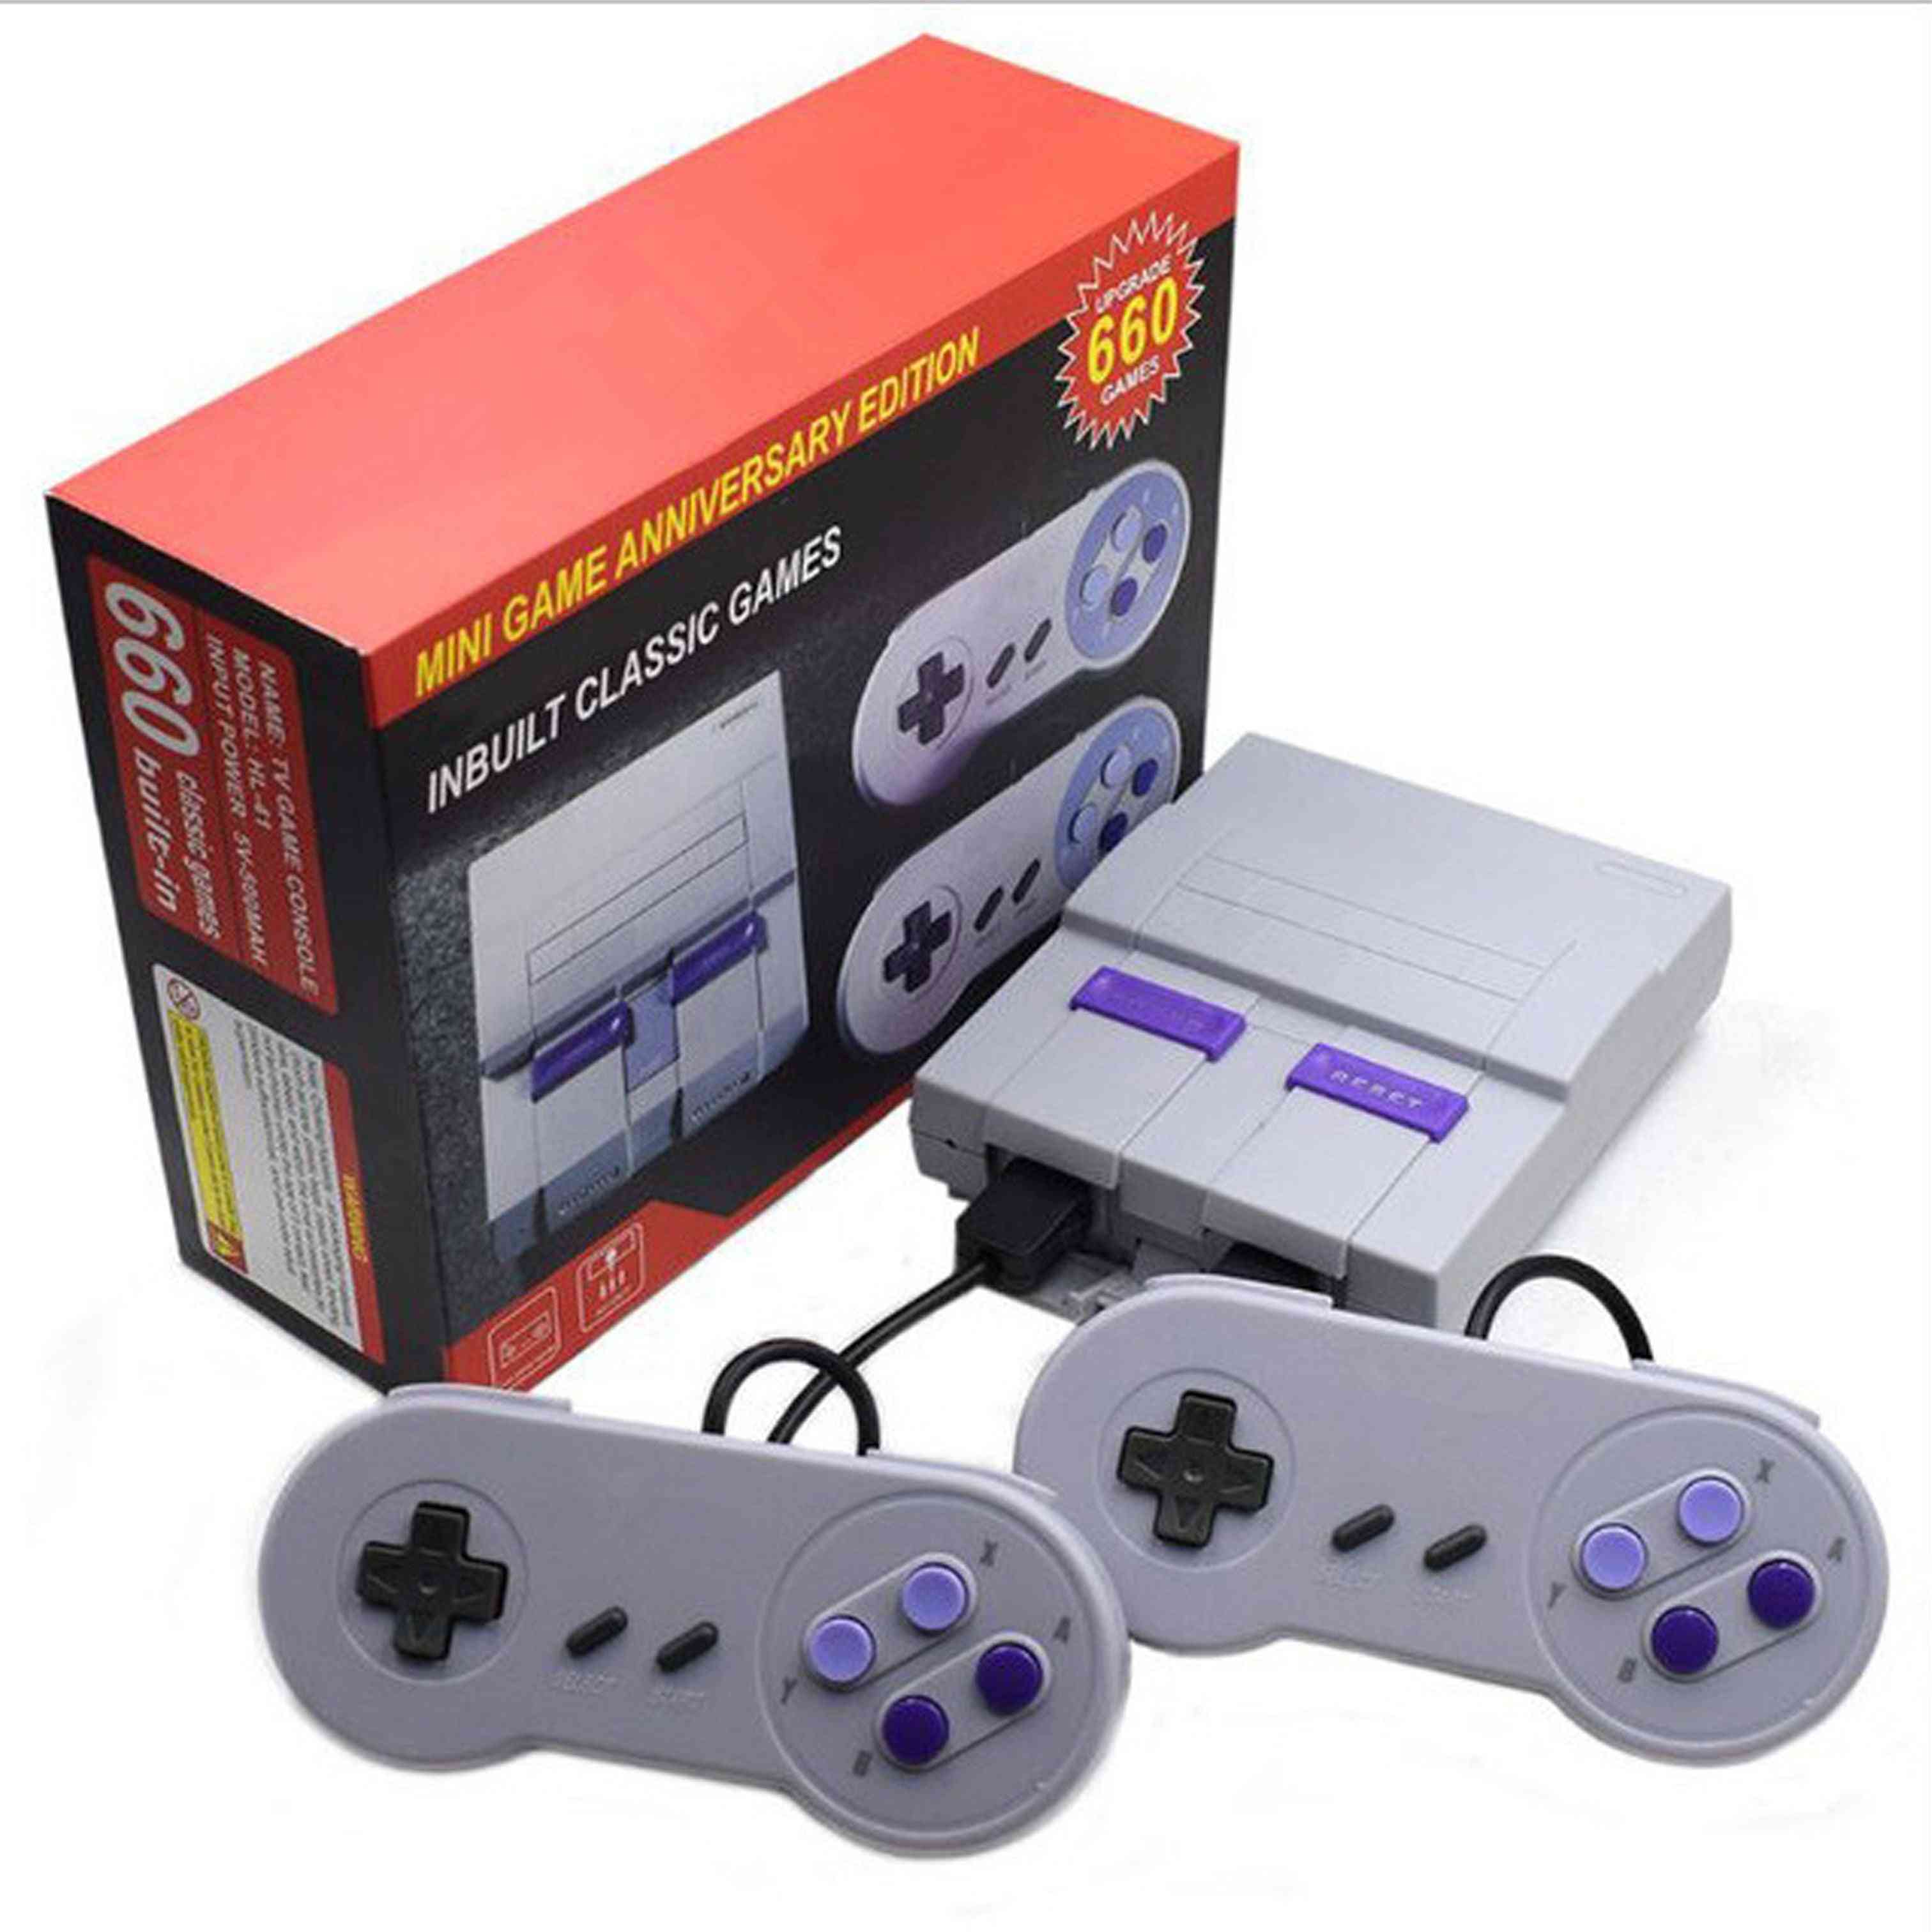 Super Classic, 8 Bit Retro, Mini Video Game And Consoles With Buit-in 660 Games With 2 Controllers